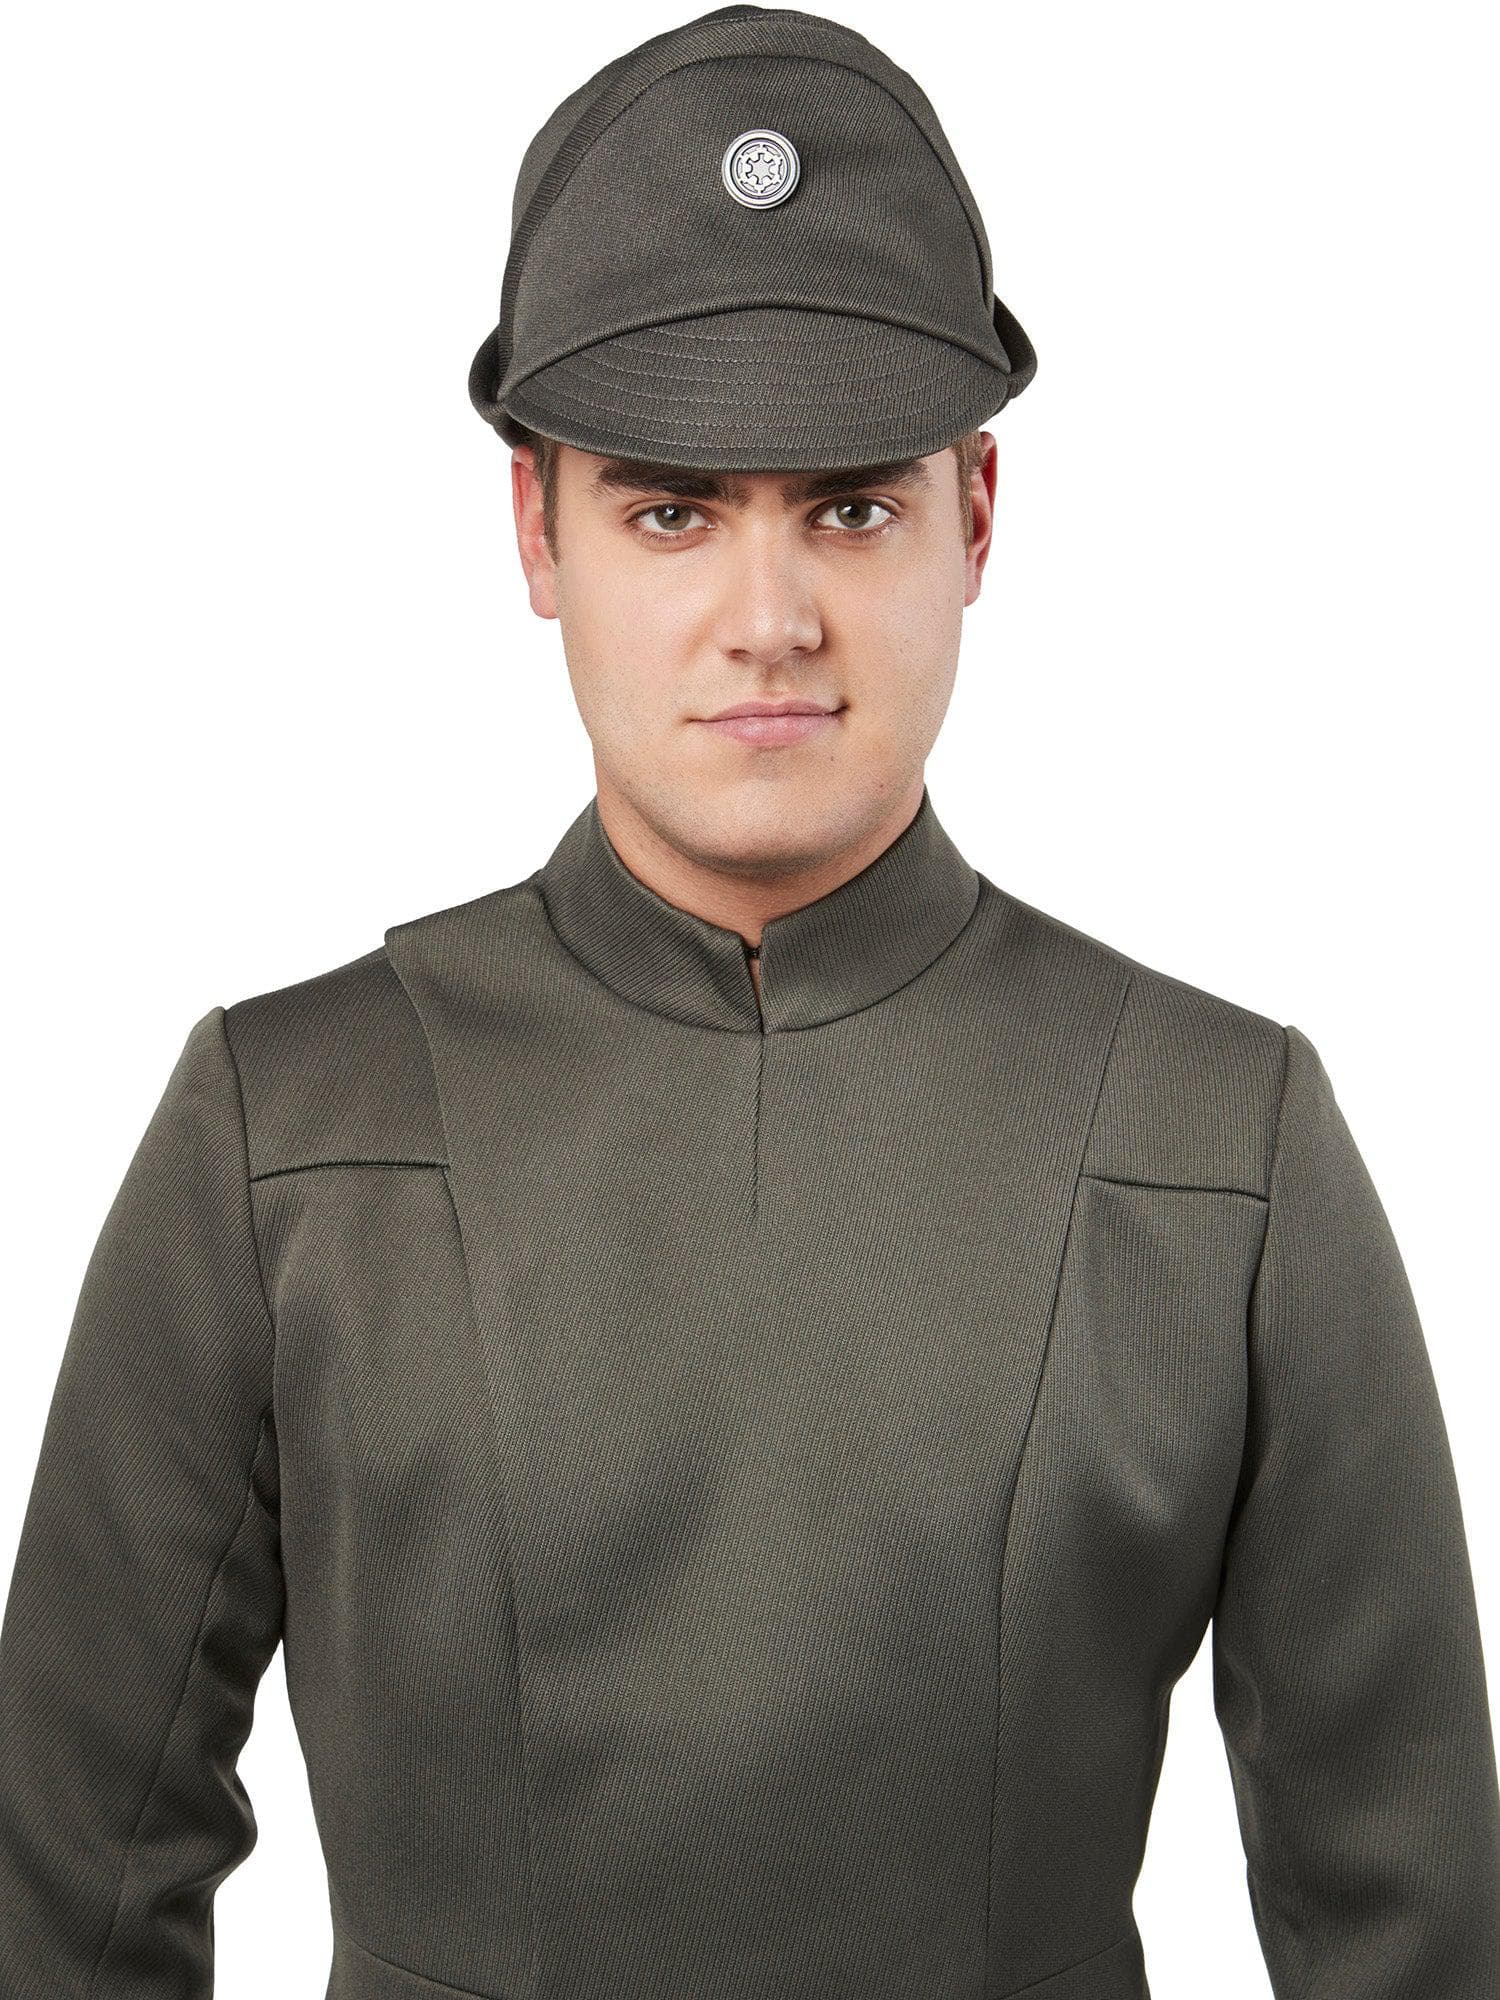 Denuo Novo - Star Wars: Imperial Officer Olive/Gray Tunic Costume Accessory - costumes.com